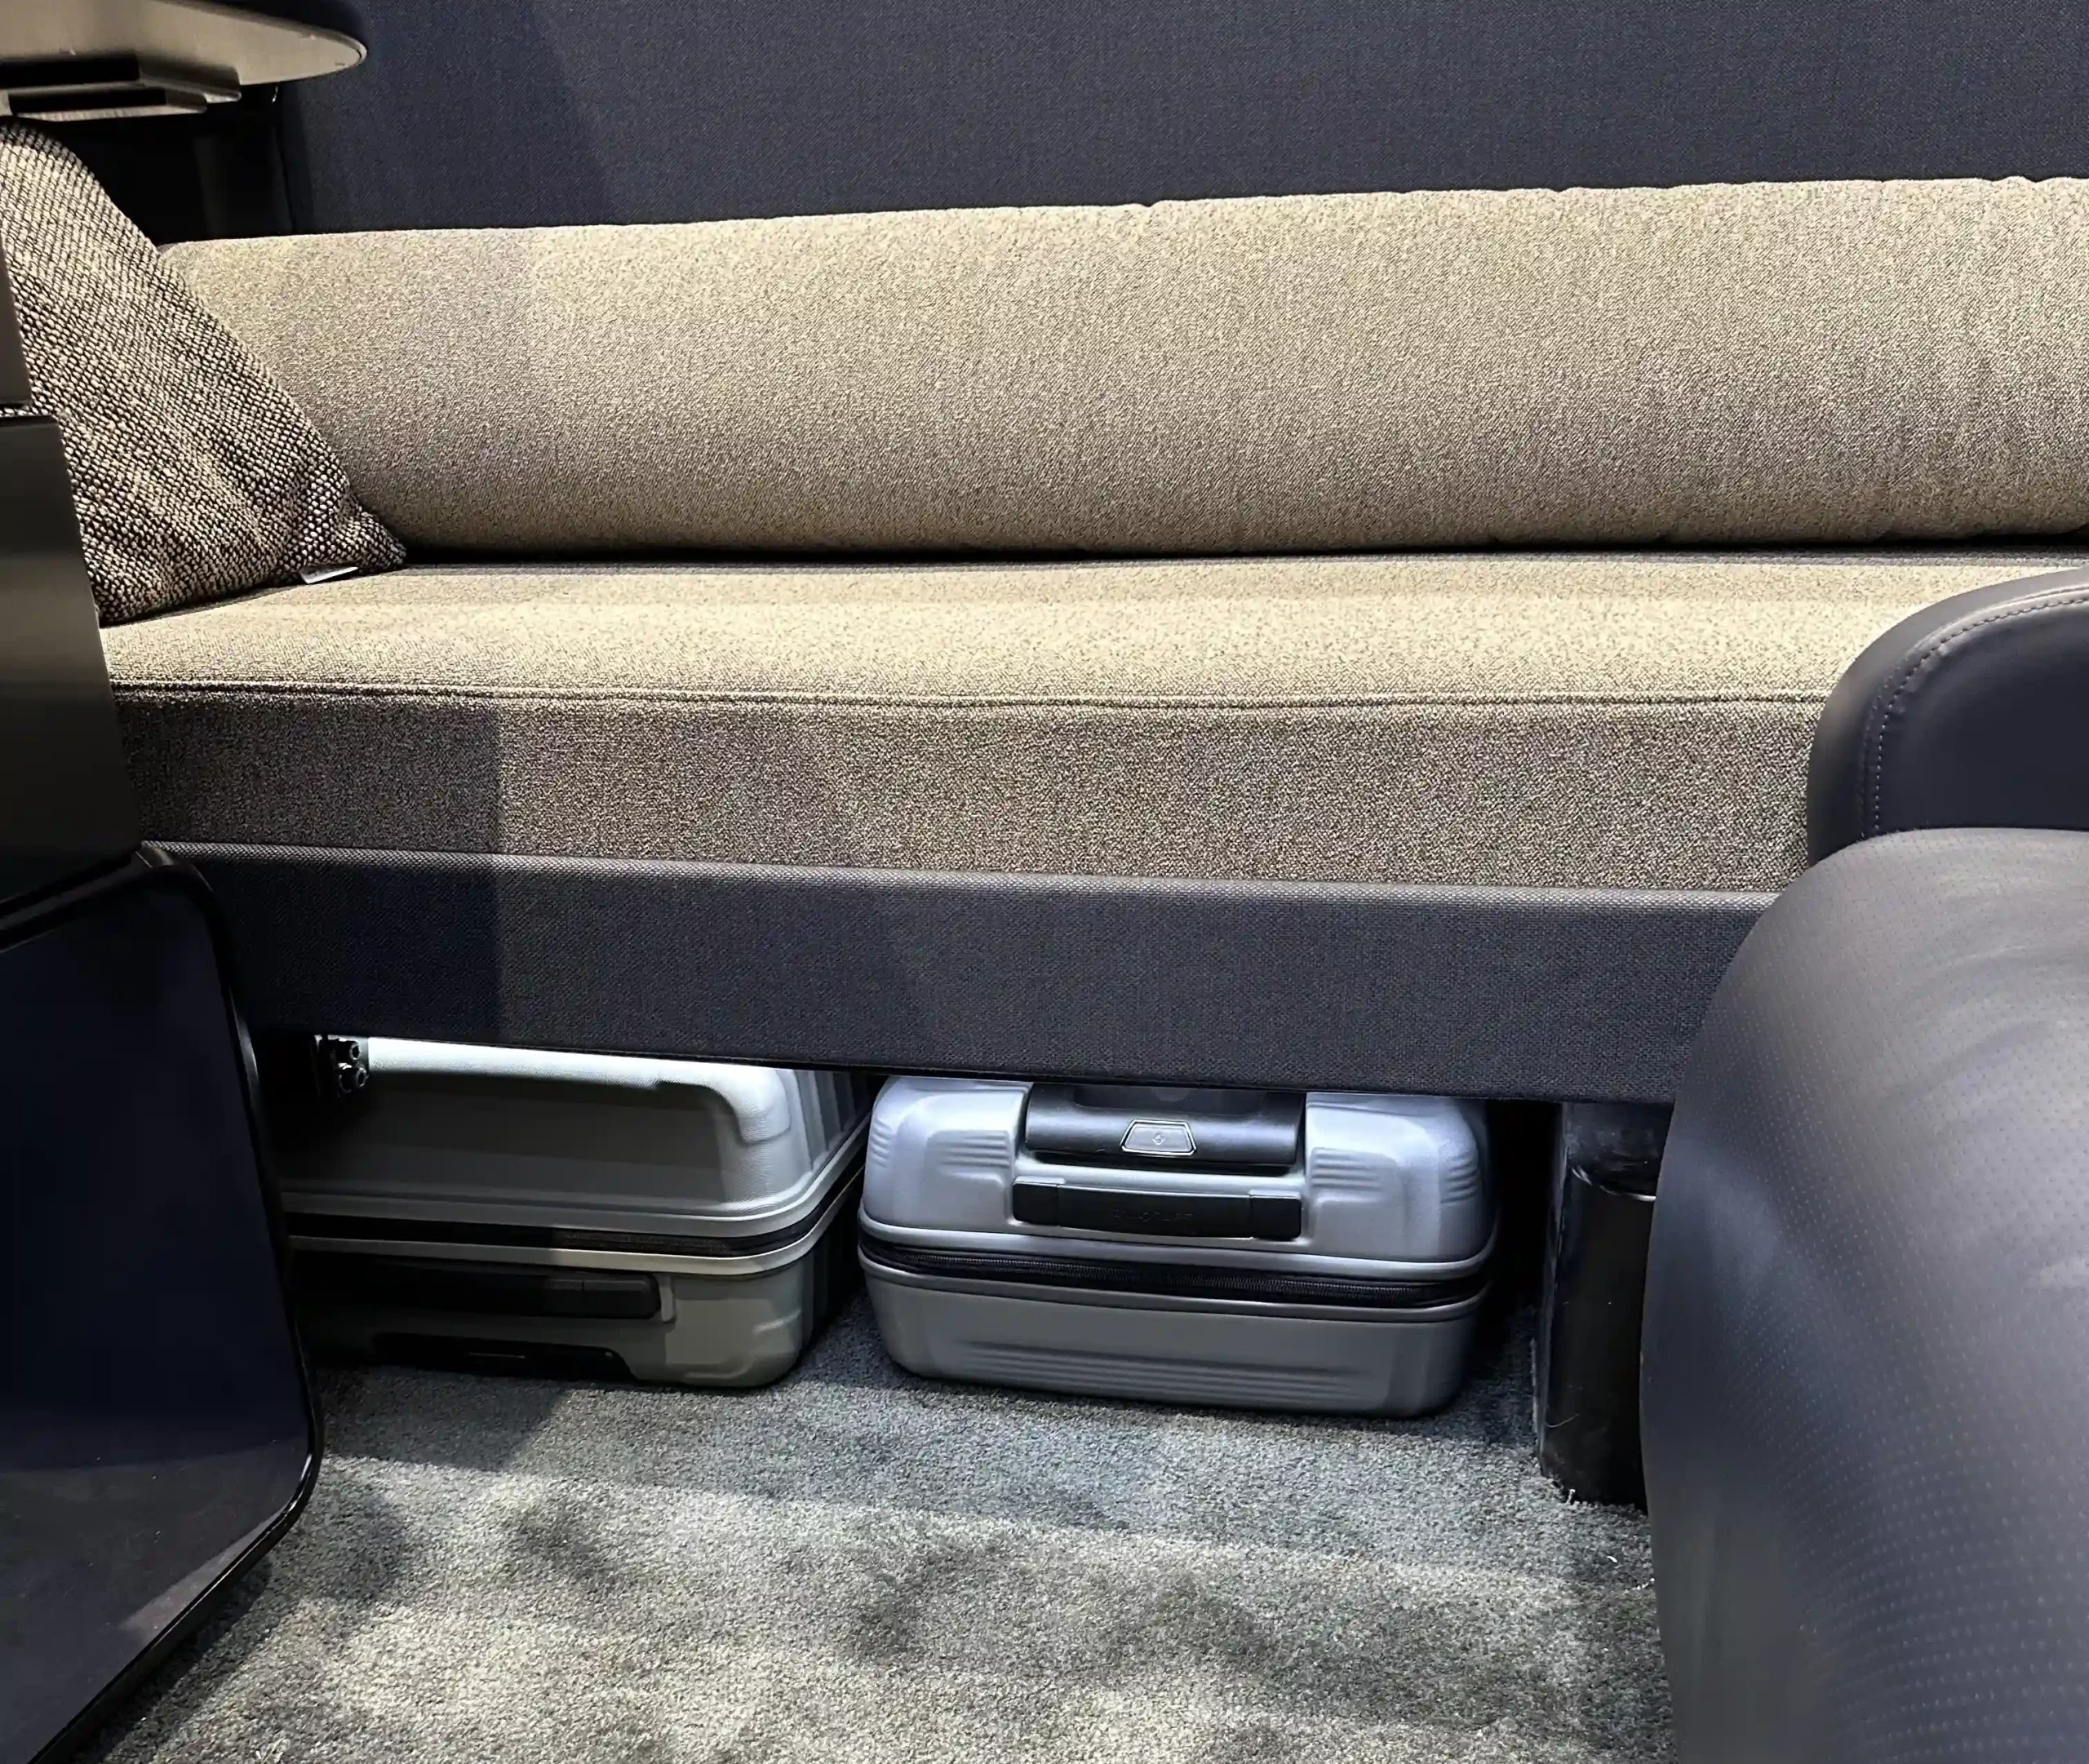 a couch with a carpeted seat and two luggage